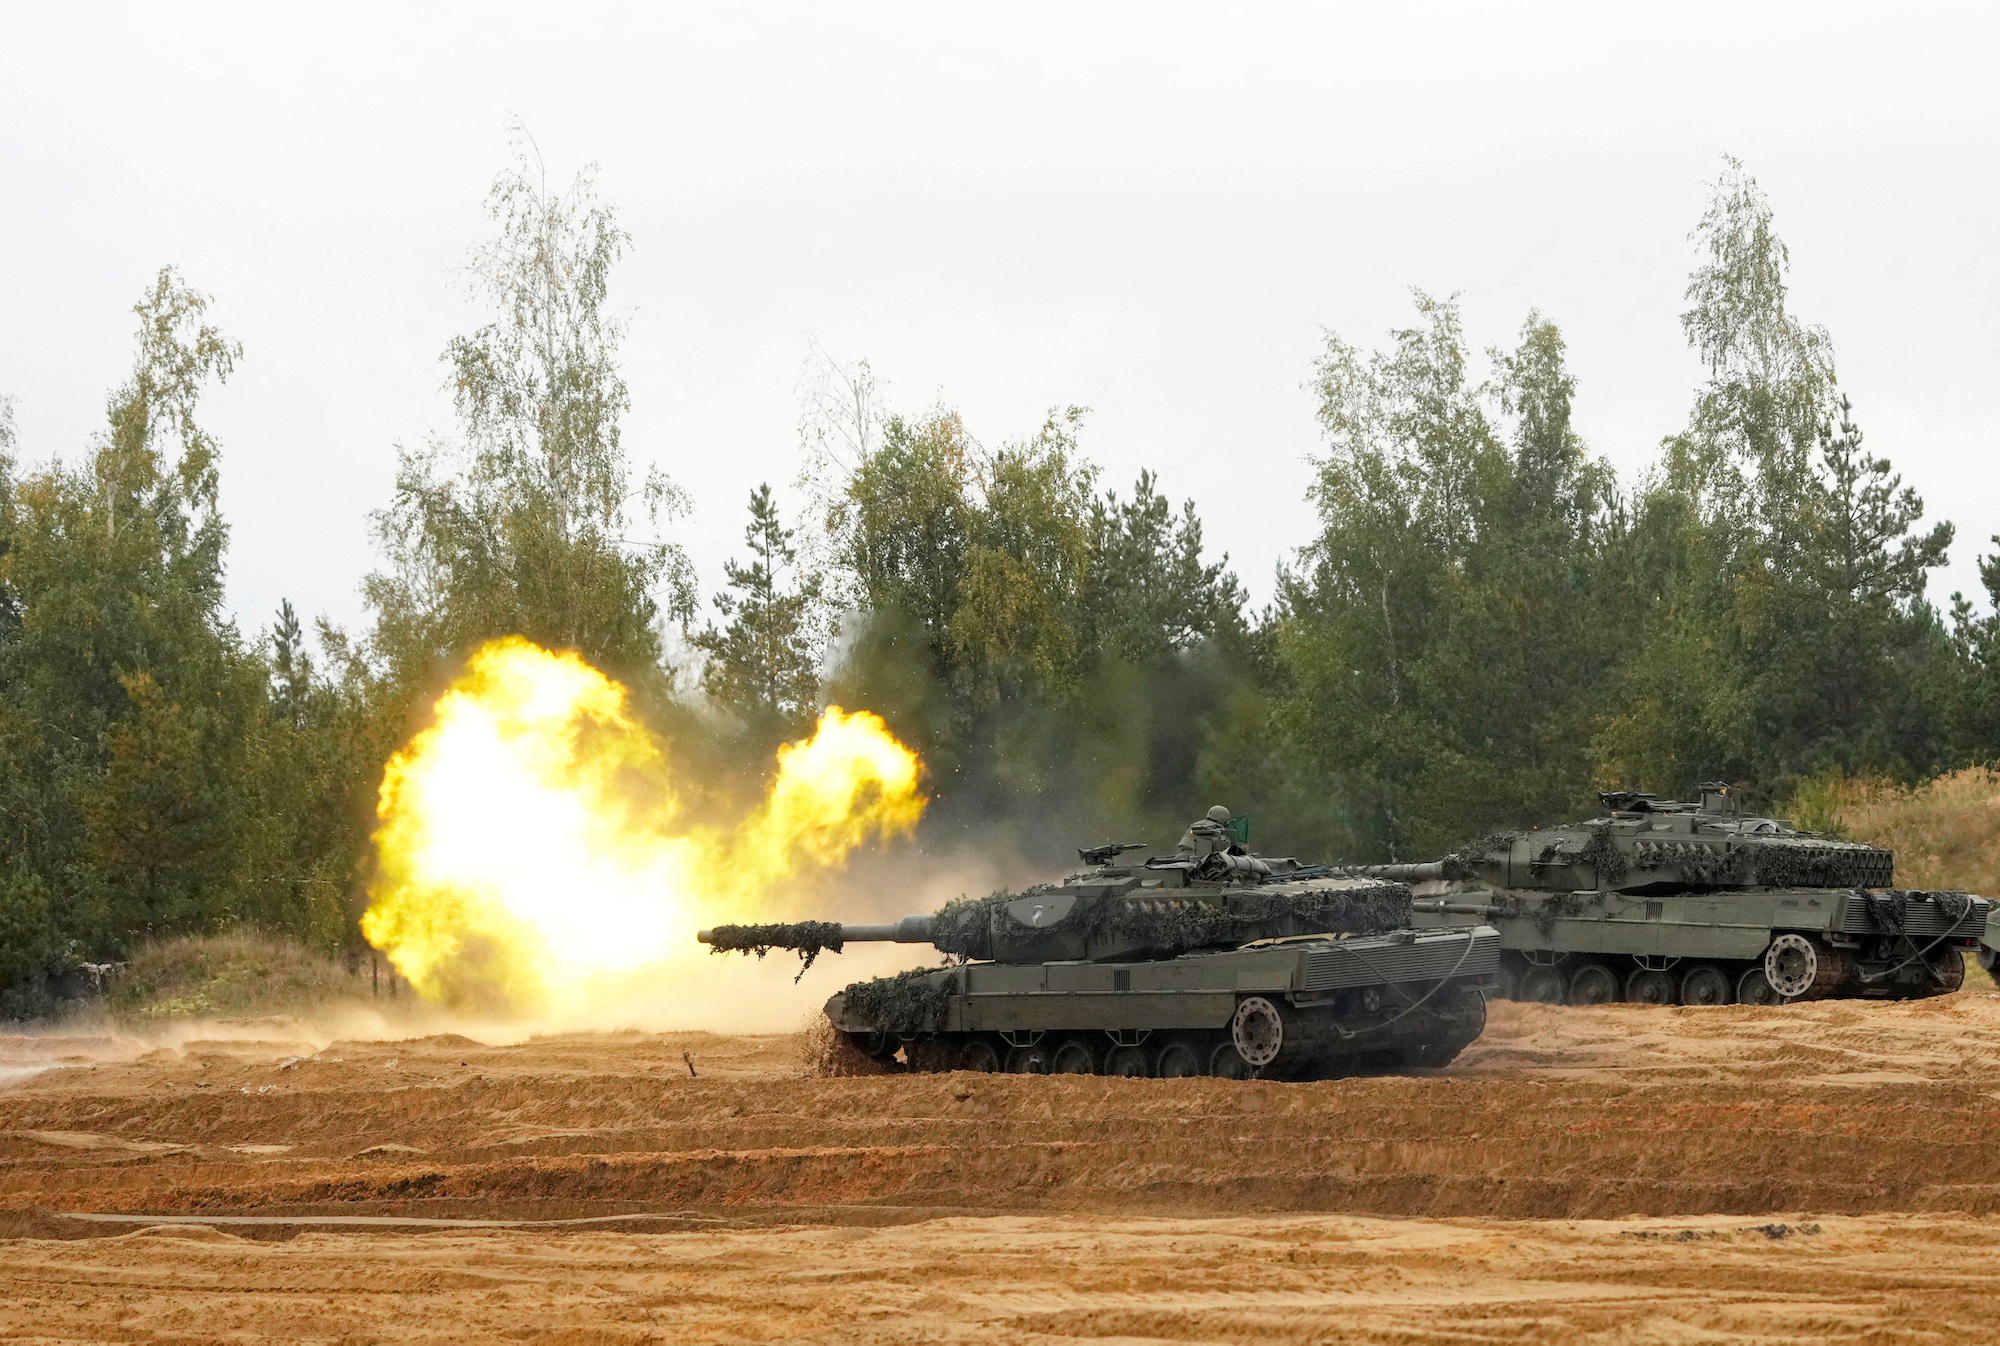 A Spanish army Leopard 2 tank fires during the final phase of a military drill Latvia on September 29, 2022